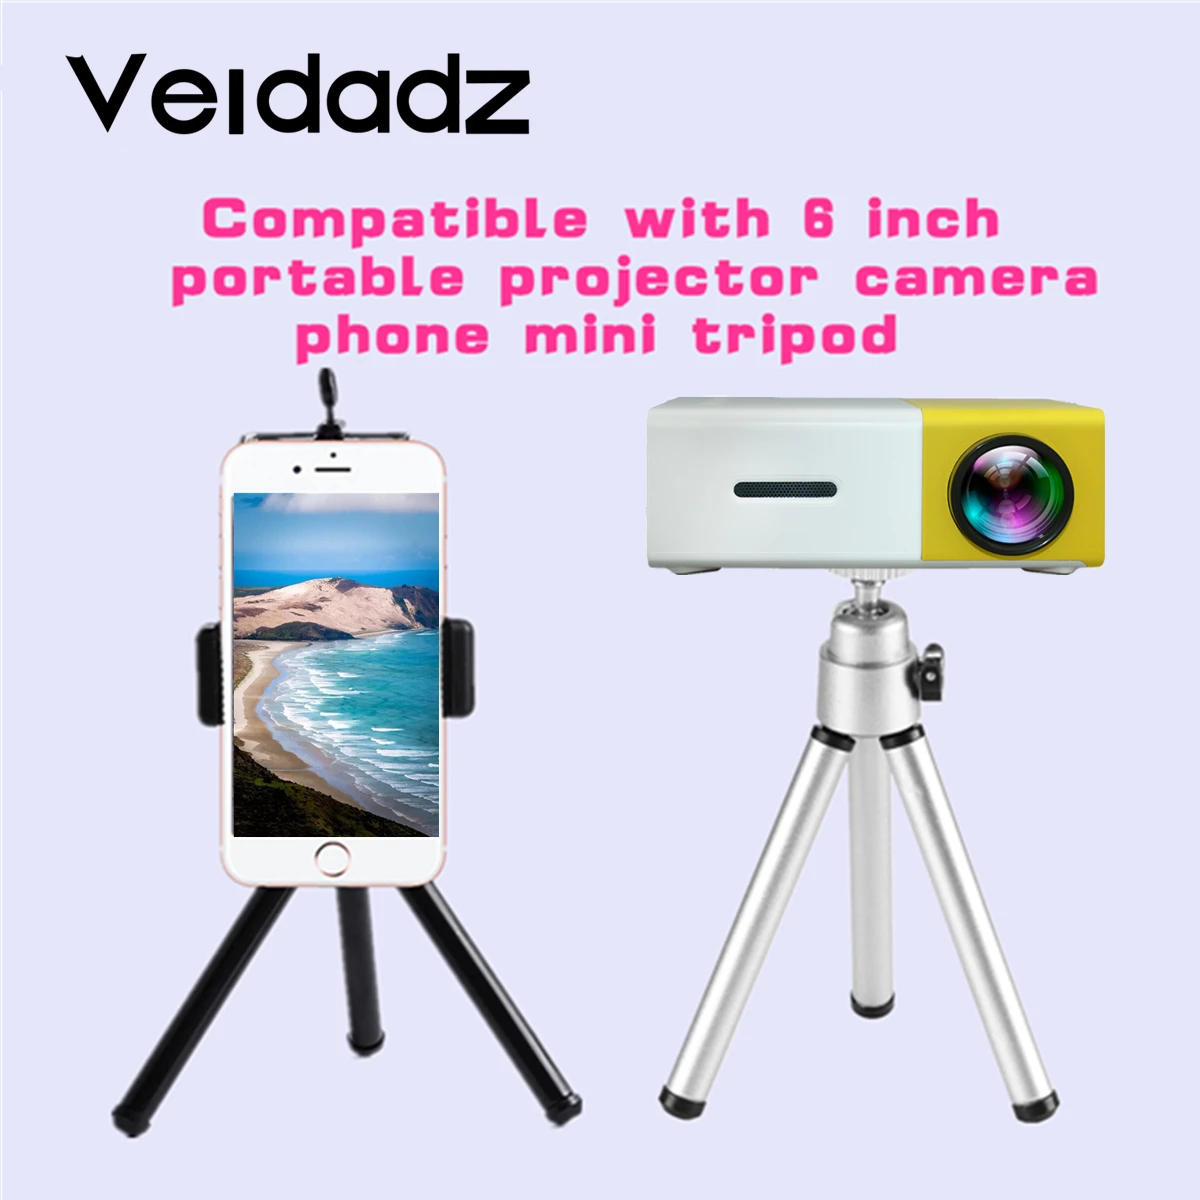 

VEIDADZ The Portable 6mm Mini Tripod is Compatible With Projector YG300 YG320 L1 Q2 A2000 T20 A10 S361 And Other Stable Supports